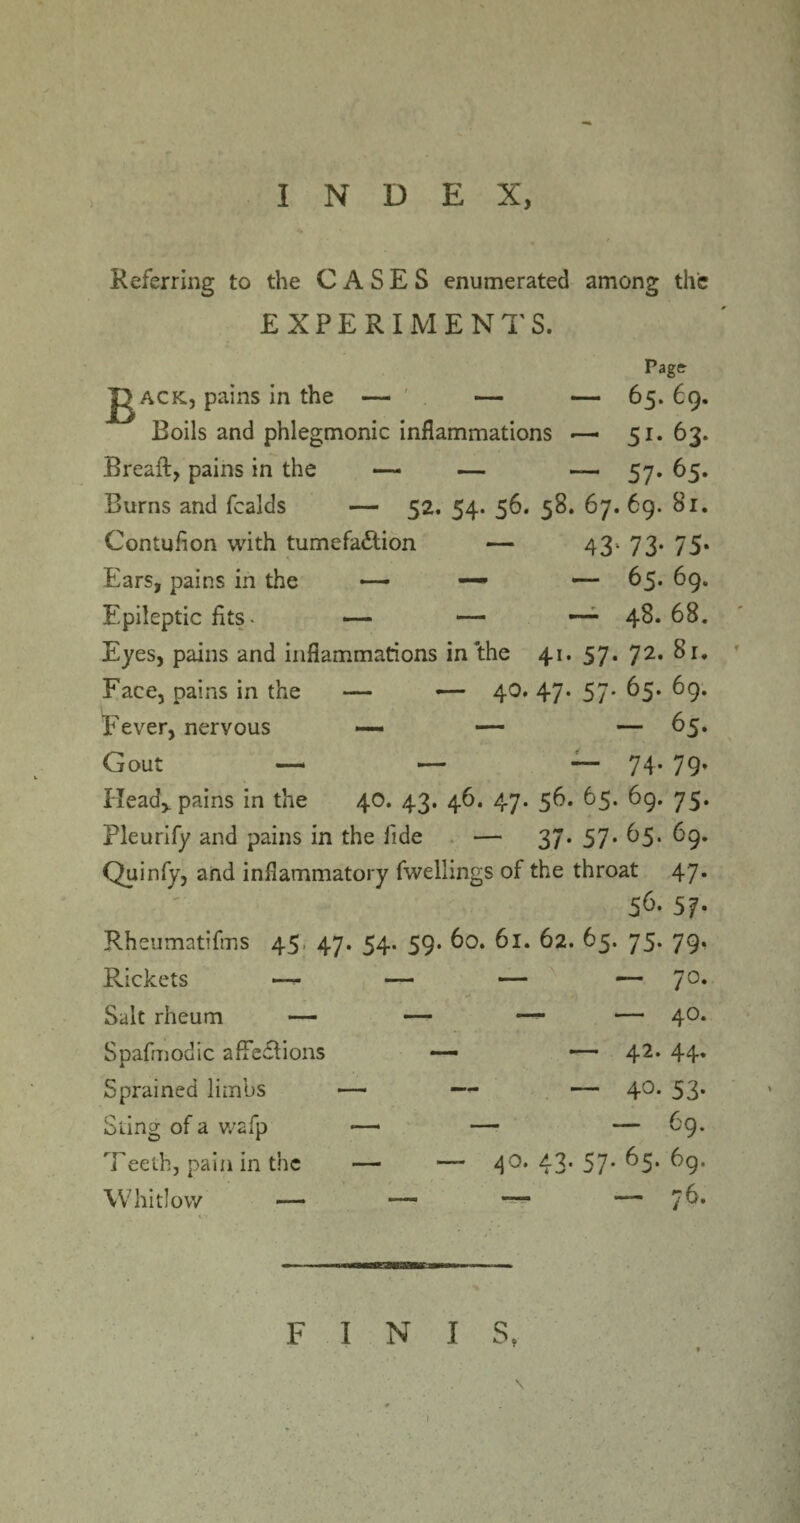 INDEX, Referring to the CASES enumerated among the EXPERIMENTS. Page- jgACK, pains in the — ' — — 65. 69 Boils and phlegmonic inflammations •—• 51. 63 Breaft, pains in the — — — 57. 65 Burns and fcalds — 52. 54. 56. 58. 67. 69. 81 Contuflon with tumefaction — 43* 73* 75 Ears, pains in the — — — 65. 69 Epileptic fits. — — — 48* 68 Eyes, pains and inflammations in the 41. 57. 72. 81 Face, pains in the — -— 40. 47* 57* ^5* 69 Fever, nervous —* — — 65 Gout —* — -— 74* 79 Head,, pains in the 40. 43. 46. 47. 56. 65. 69. 75 Pleurify and pains in the fide — 37. 57. 65. 69 Quinfy, and inflammatory fwellings of the throat 47 56. 57 Rheumatifms 45 47. 54. 59. 60. 61. 62. 65. 75. 79 Rickets — — — — 7° Salt rheum — — — — 40 Spafmodic affedtions •— — 42* 44 Sprained limbs — — — 4°* 53 Sling of a wafp — — — 69 Teeth, pain in the — — 4°* 43* 57* ^5* 69 Whitlow —— —— —“ — 76 F I N I St 1